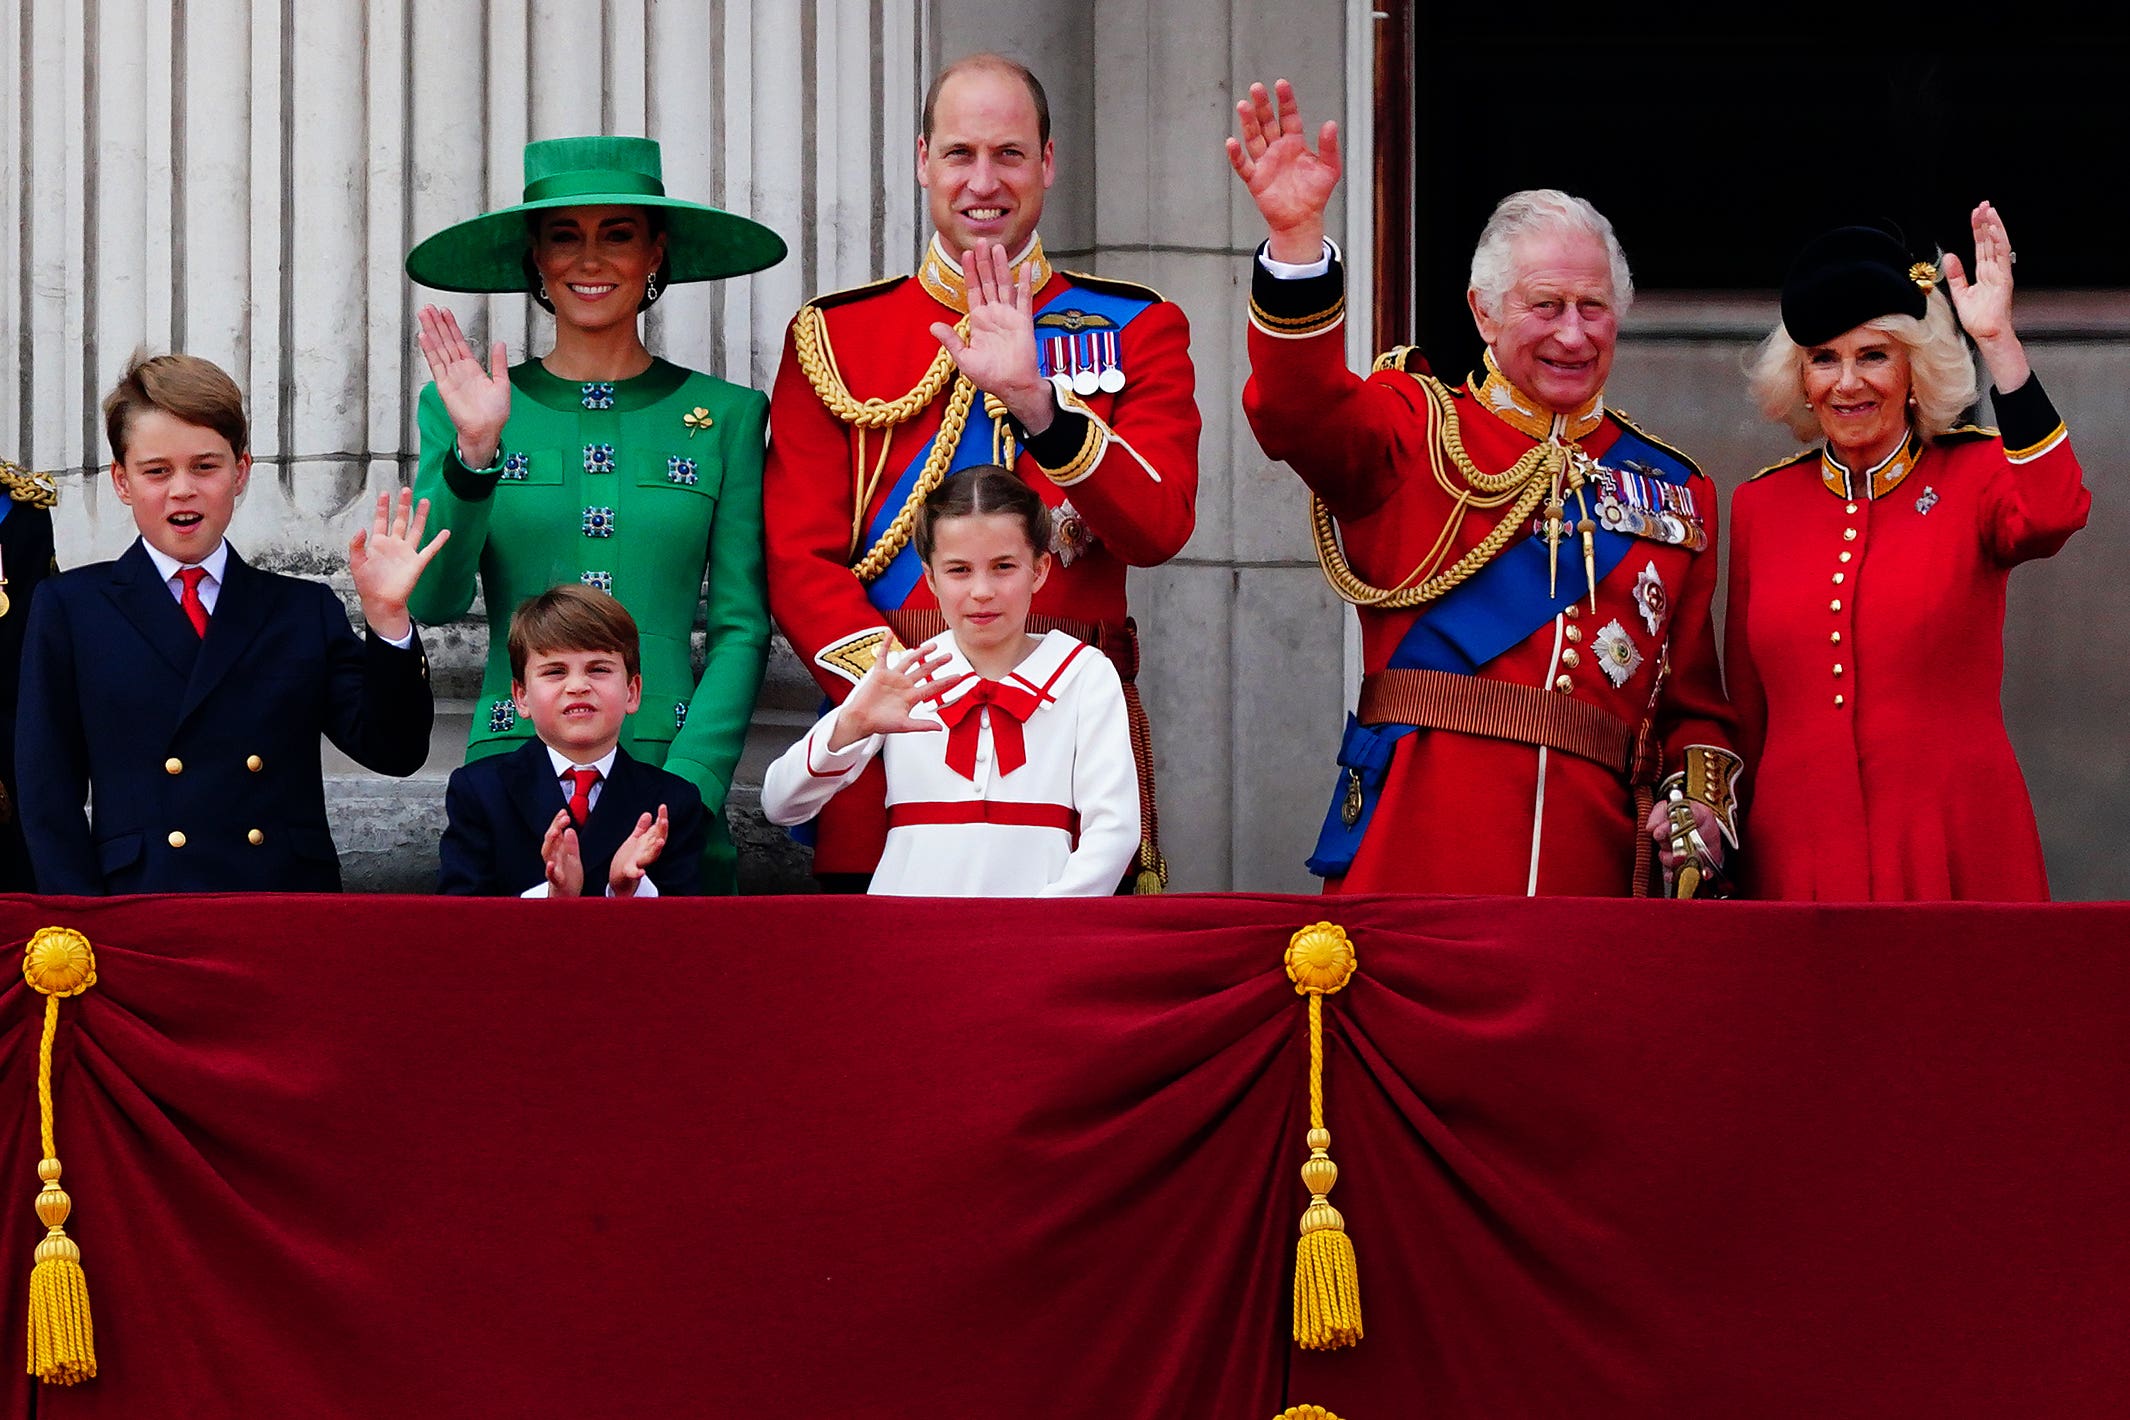 Kate Middleton could make a surprise appearance at this year's Trooping the Color (Victoria Jones/PA)